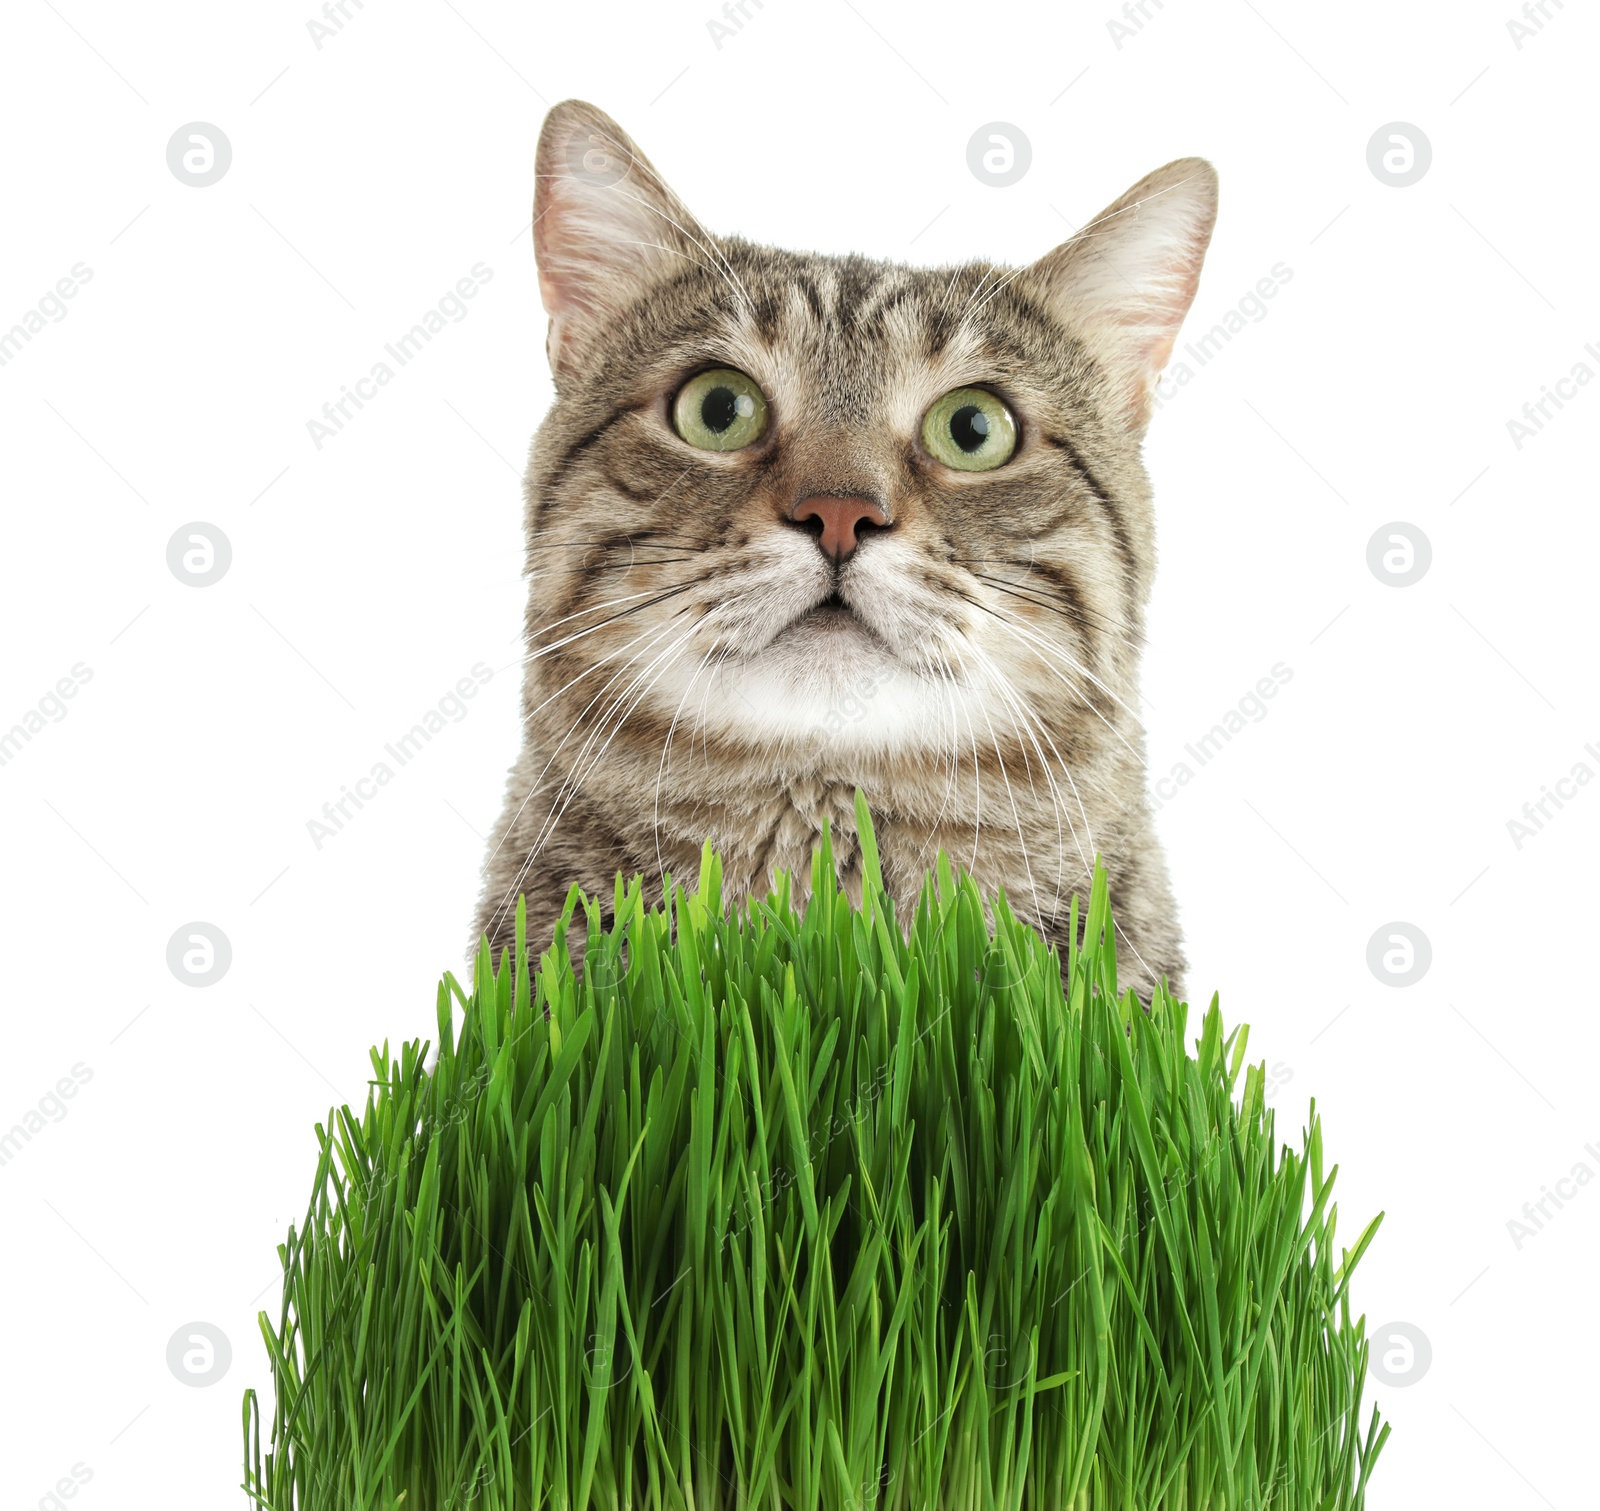 Image of Adorable cat and fresh green grass on white background